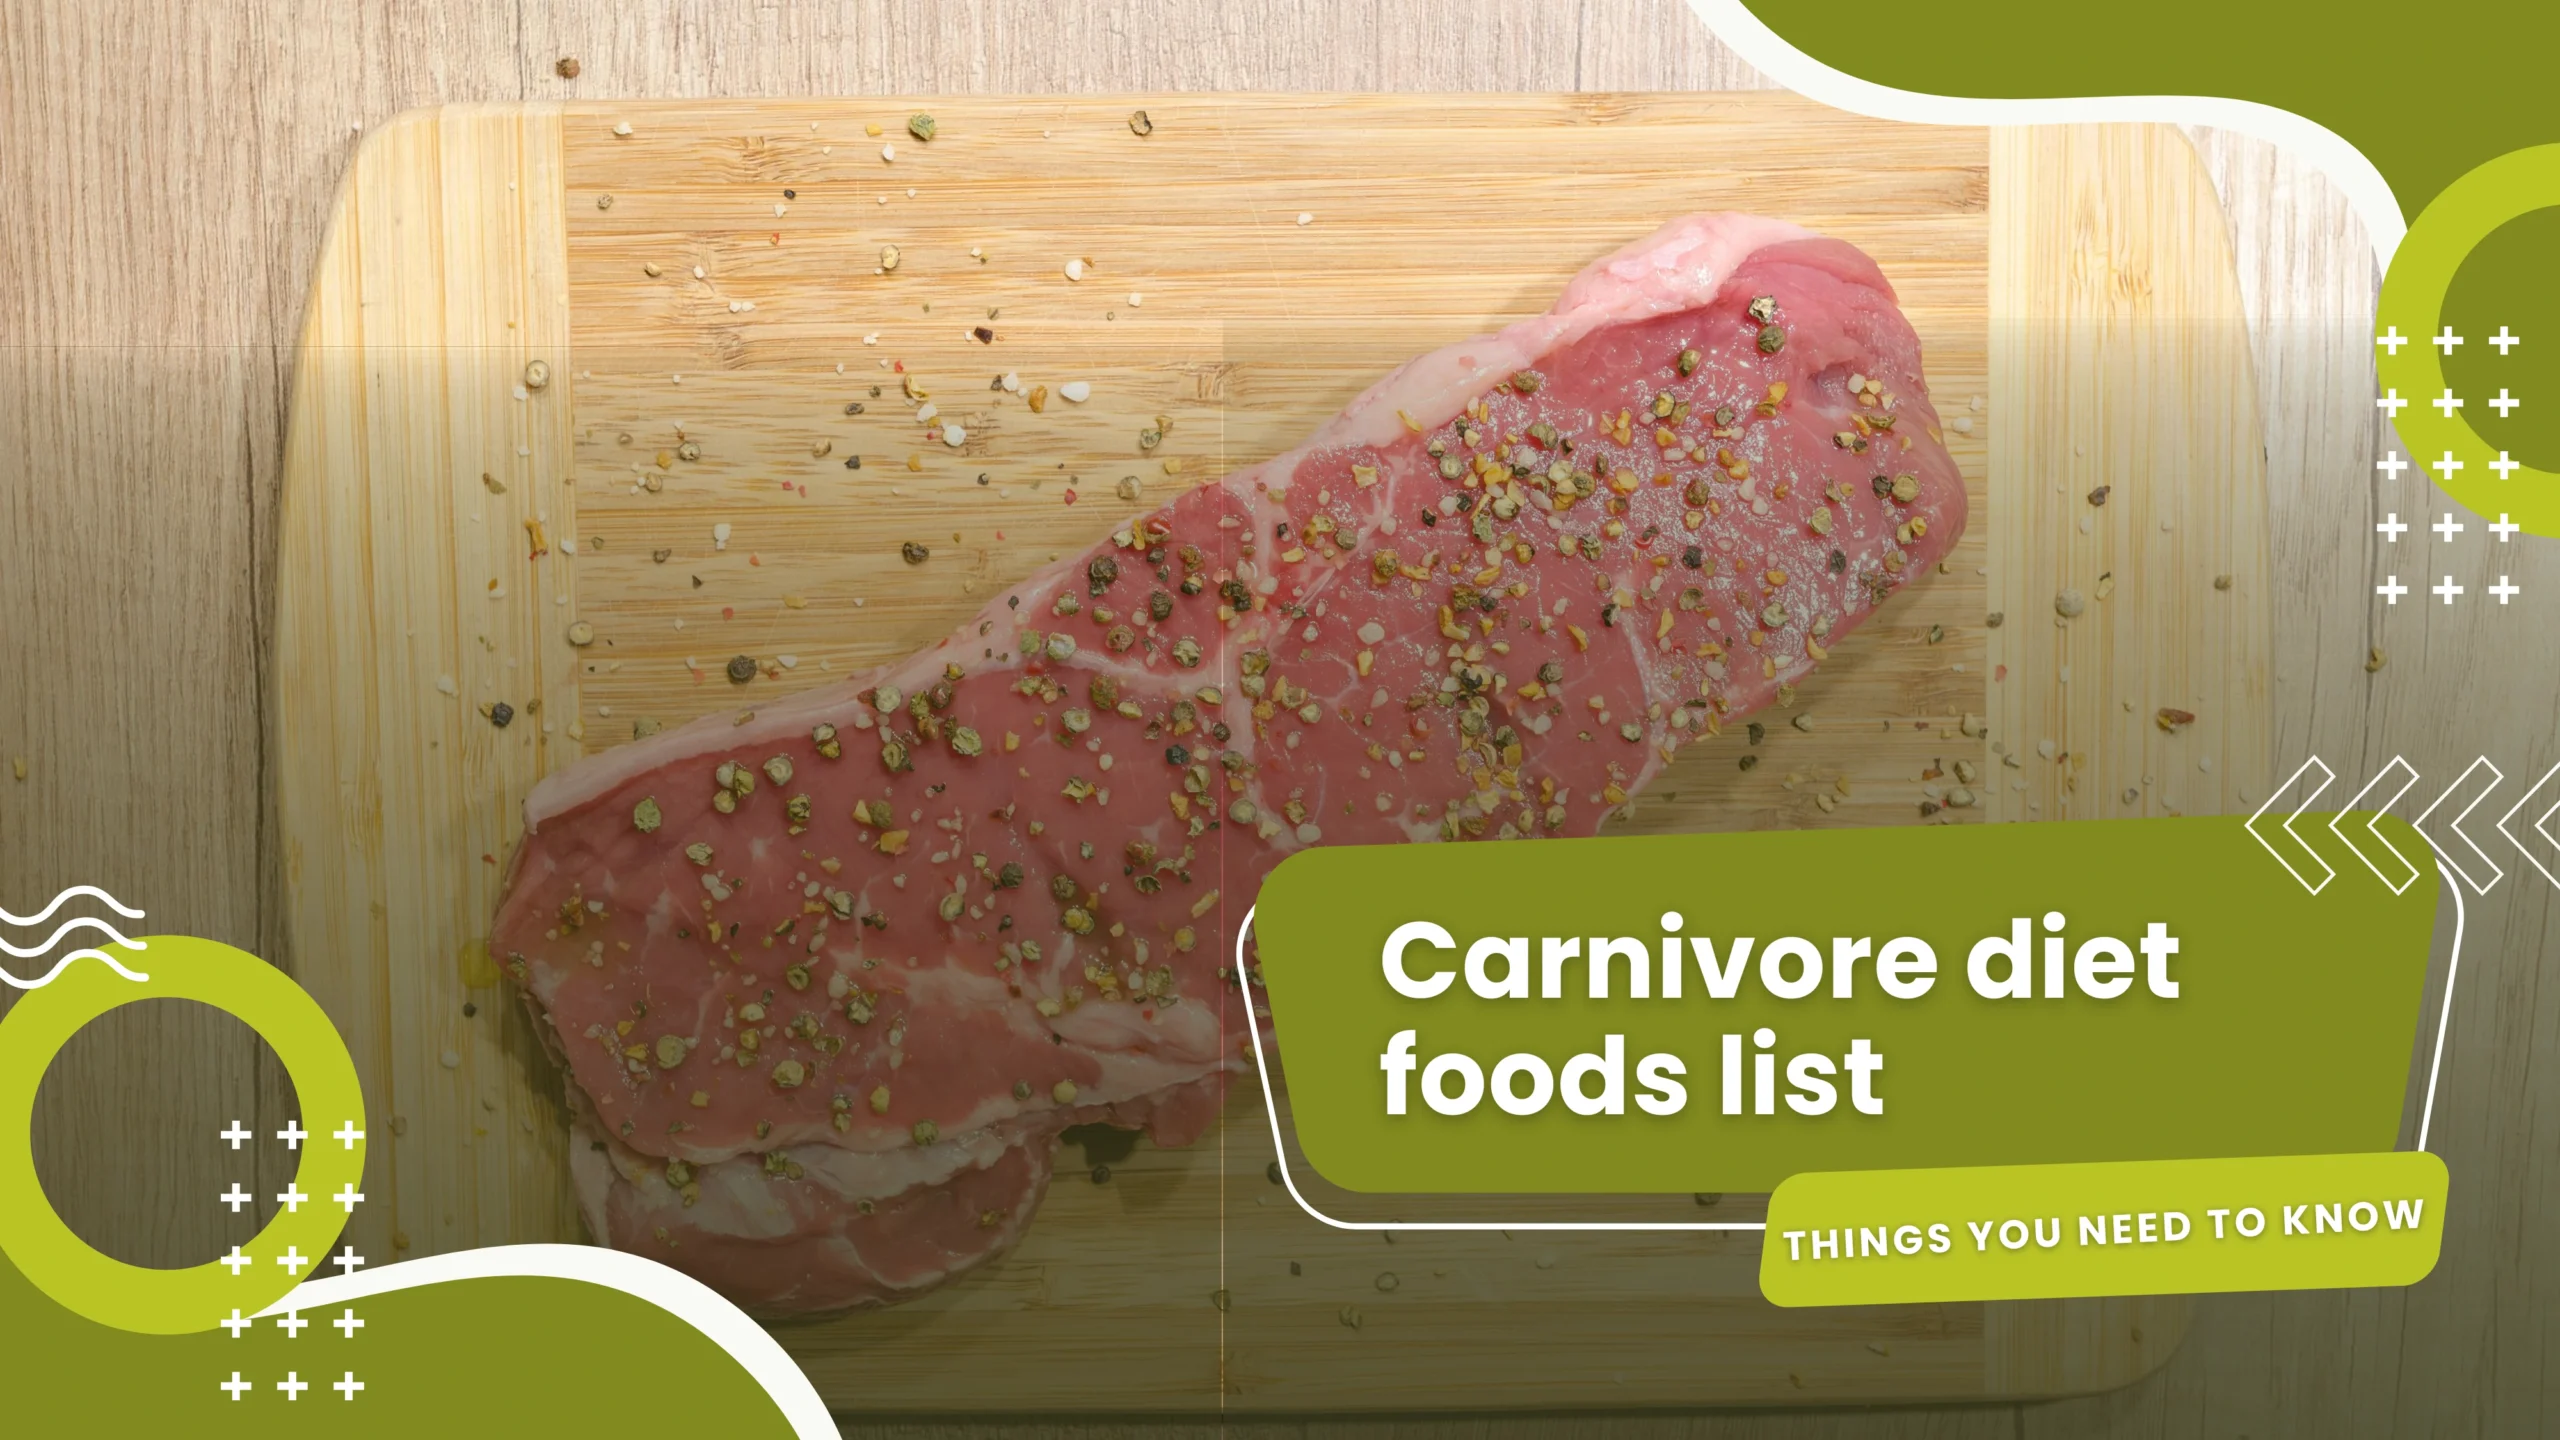 Carnivore diet foods list- Things you need to know